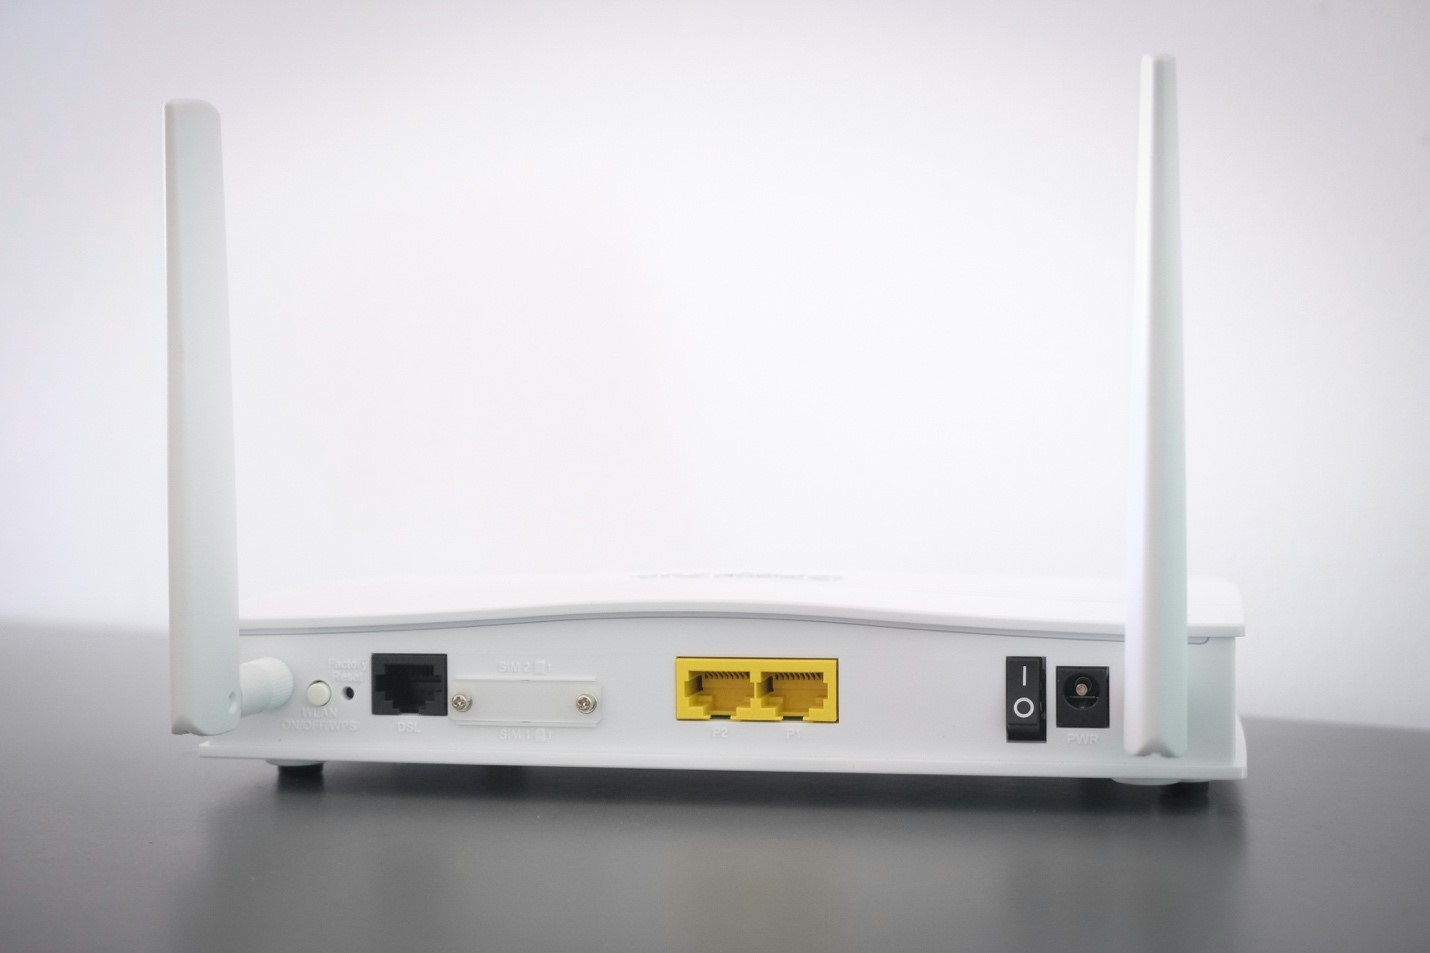 A wireless router without any cables plugged into it. Rebooting a router is often the first troubleshooting tip you’ll hear if you’re having internet issues.